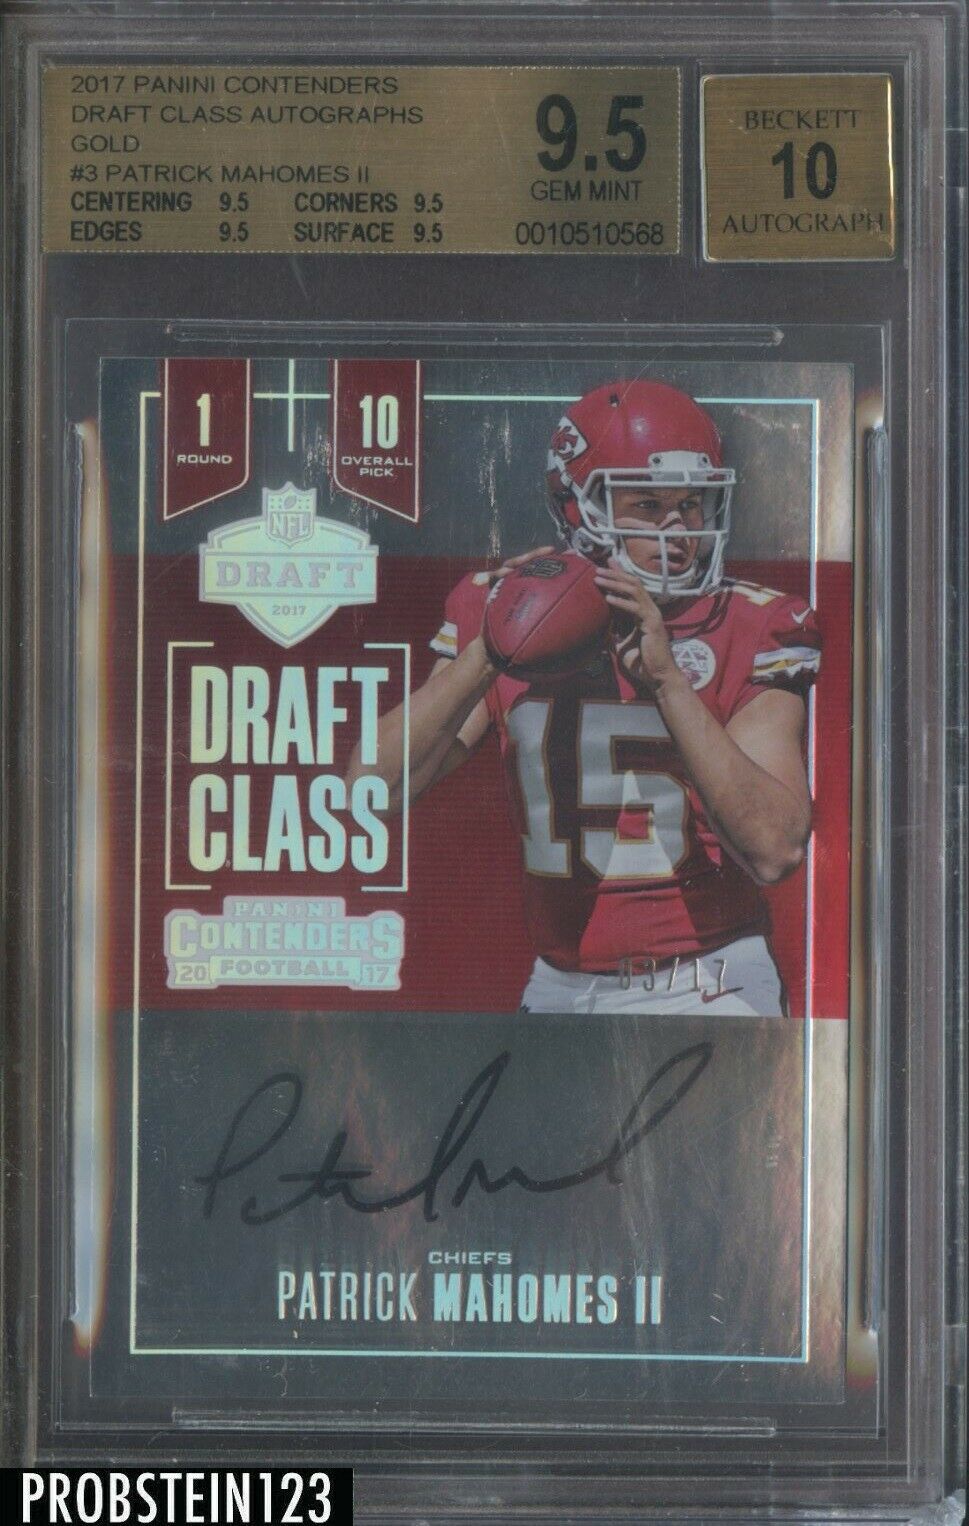 2017 Contenders Draft Class Gold Patrick Mahomes II RC 317 BGS 95 w 10 AUTO